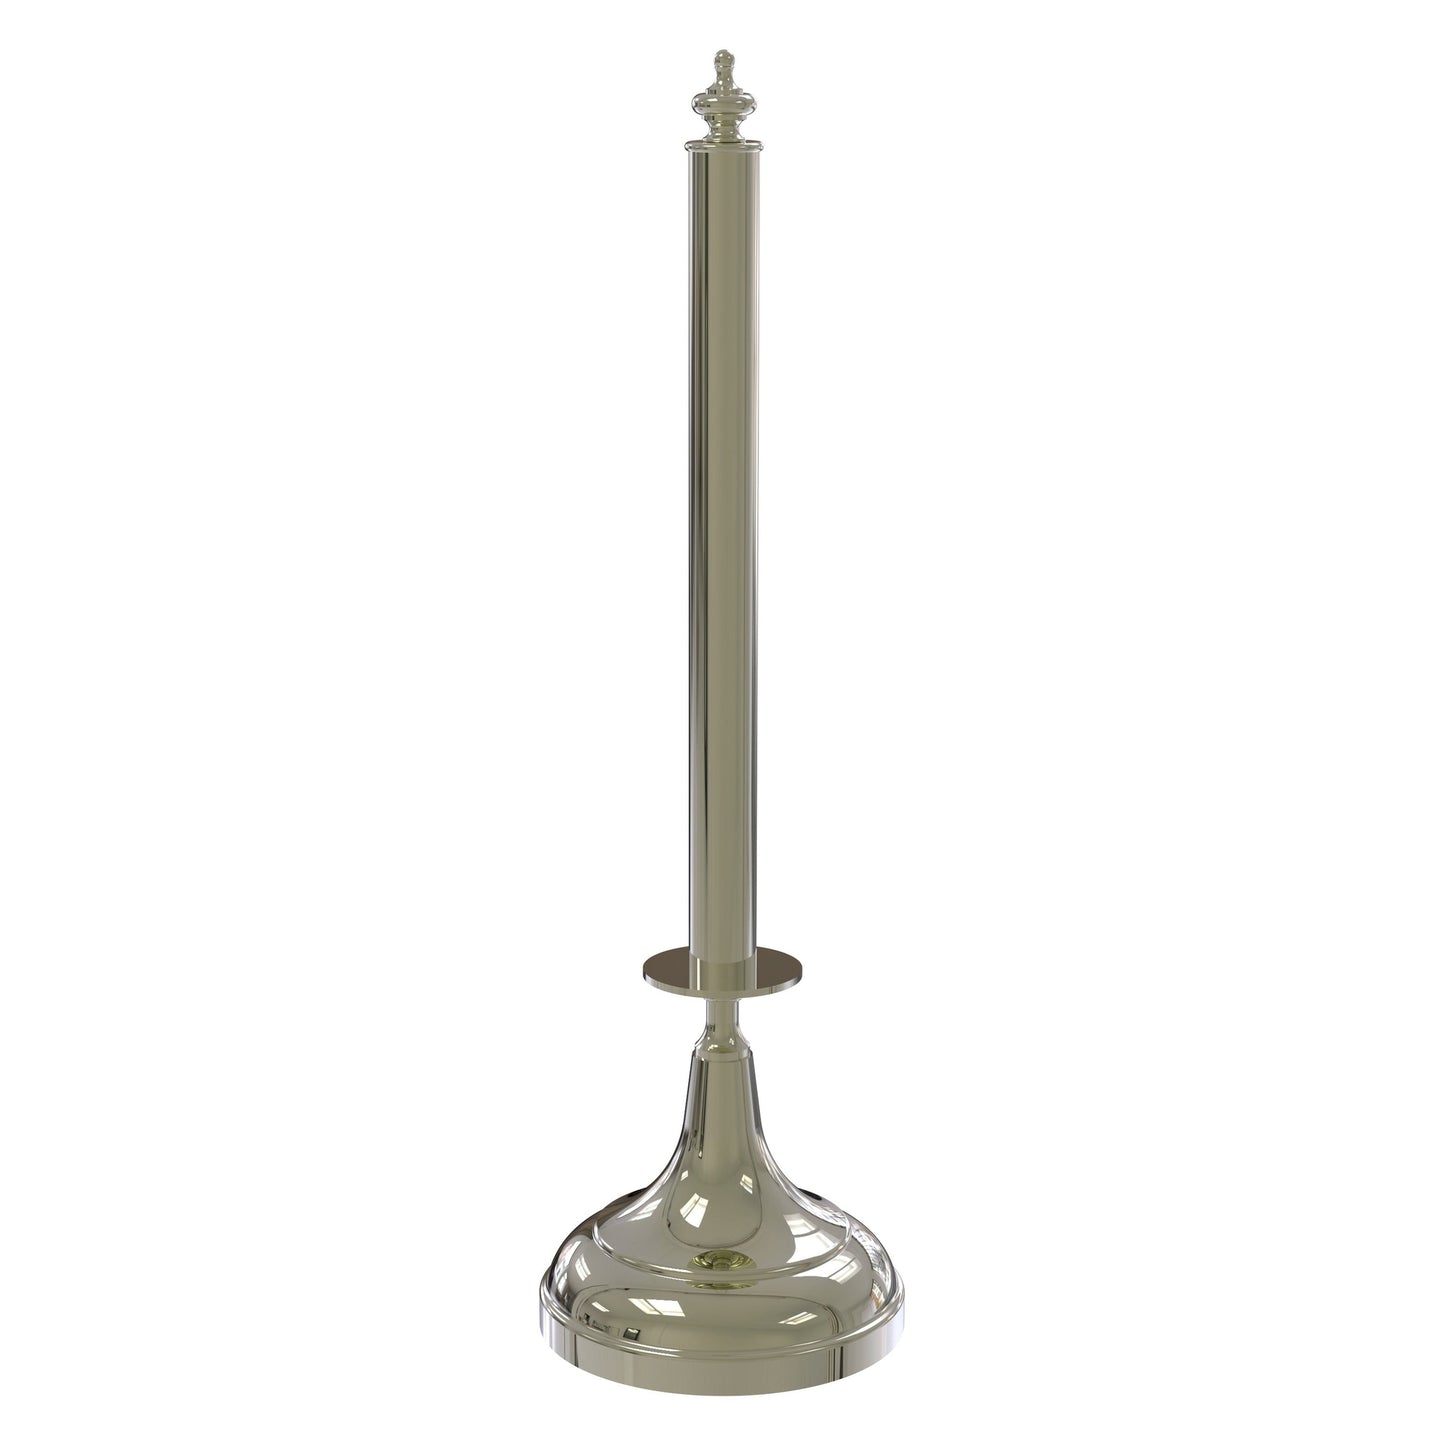 Allied Brass 1052 5.5" Polished Nickel Solid Brass Paper Towel Holder